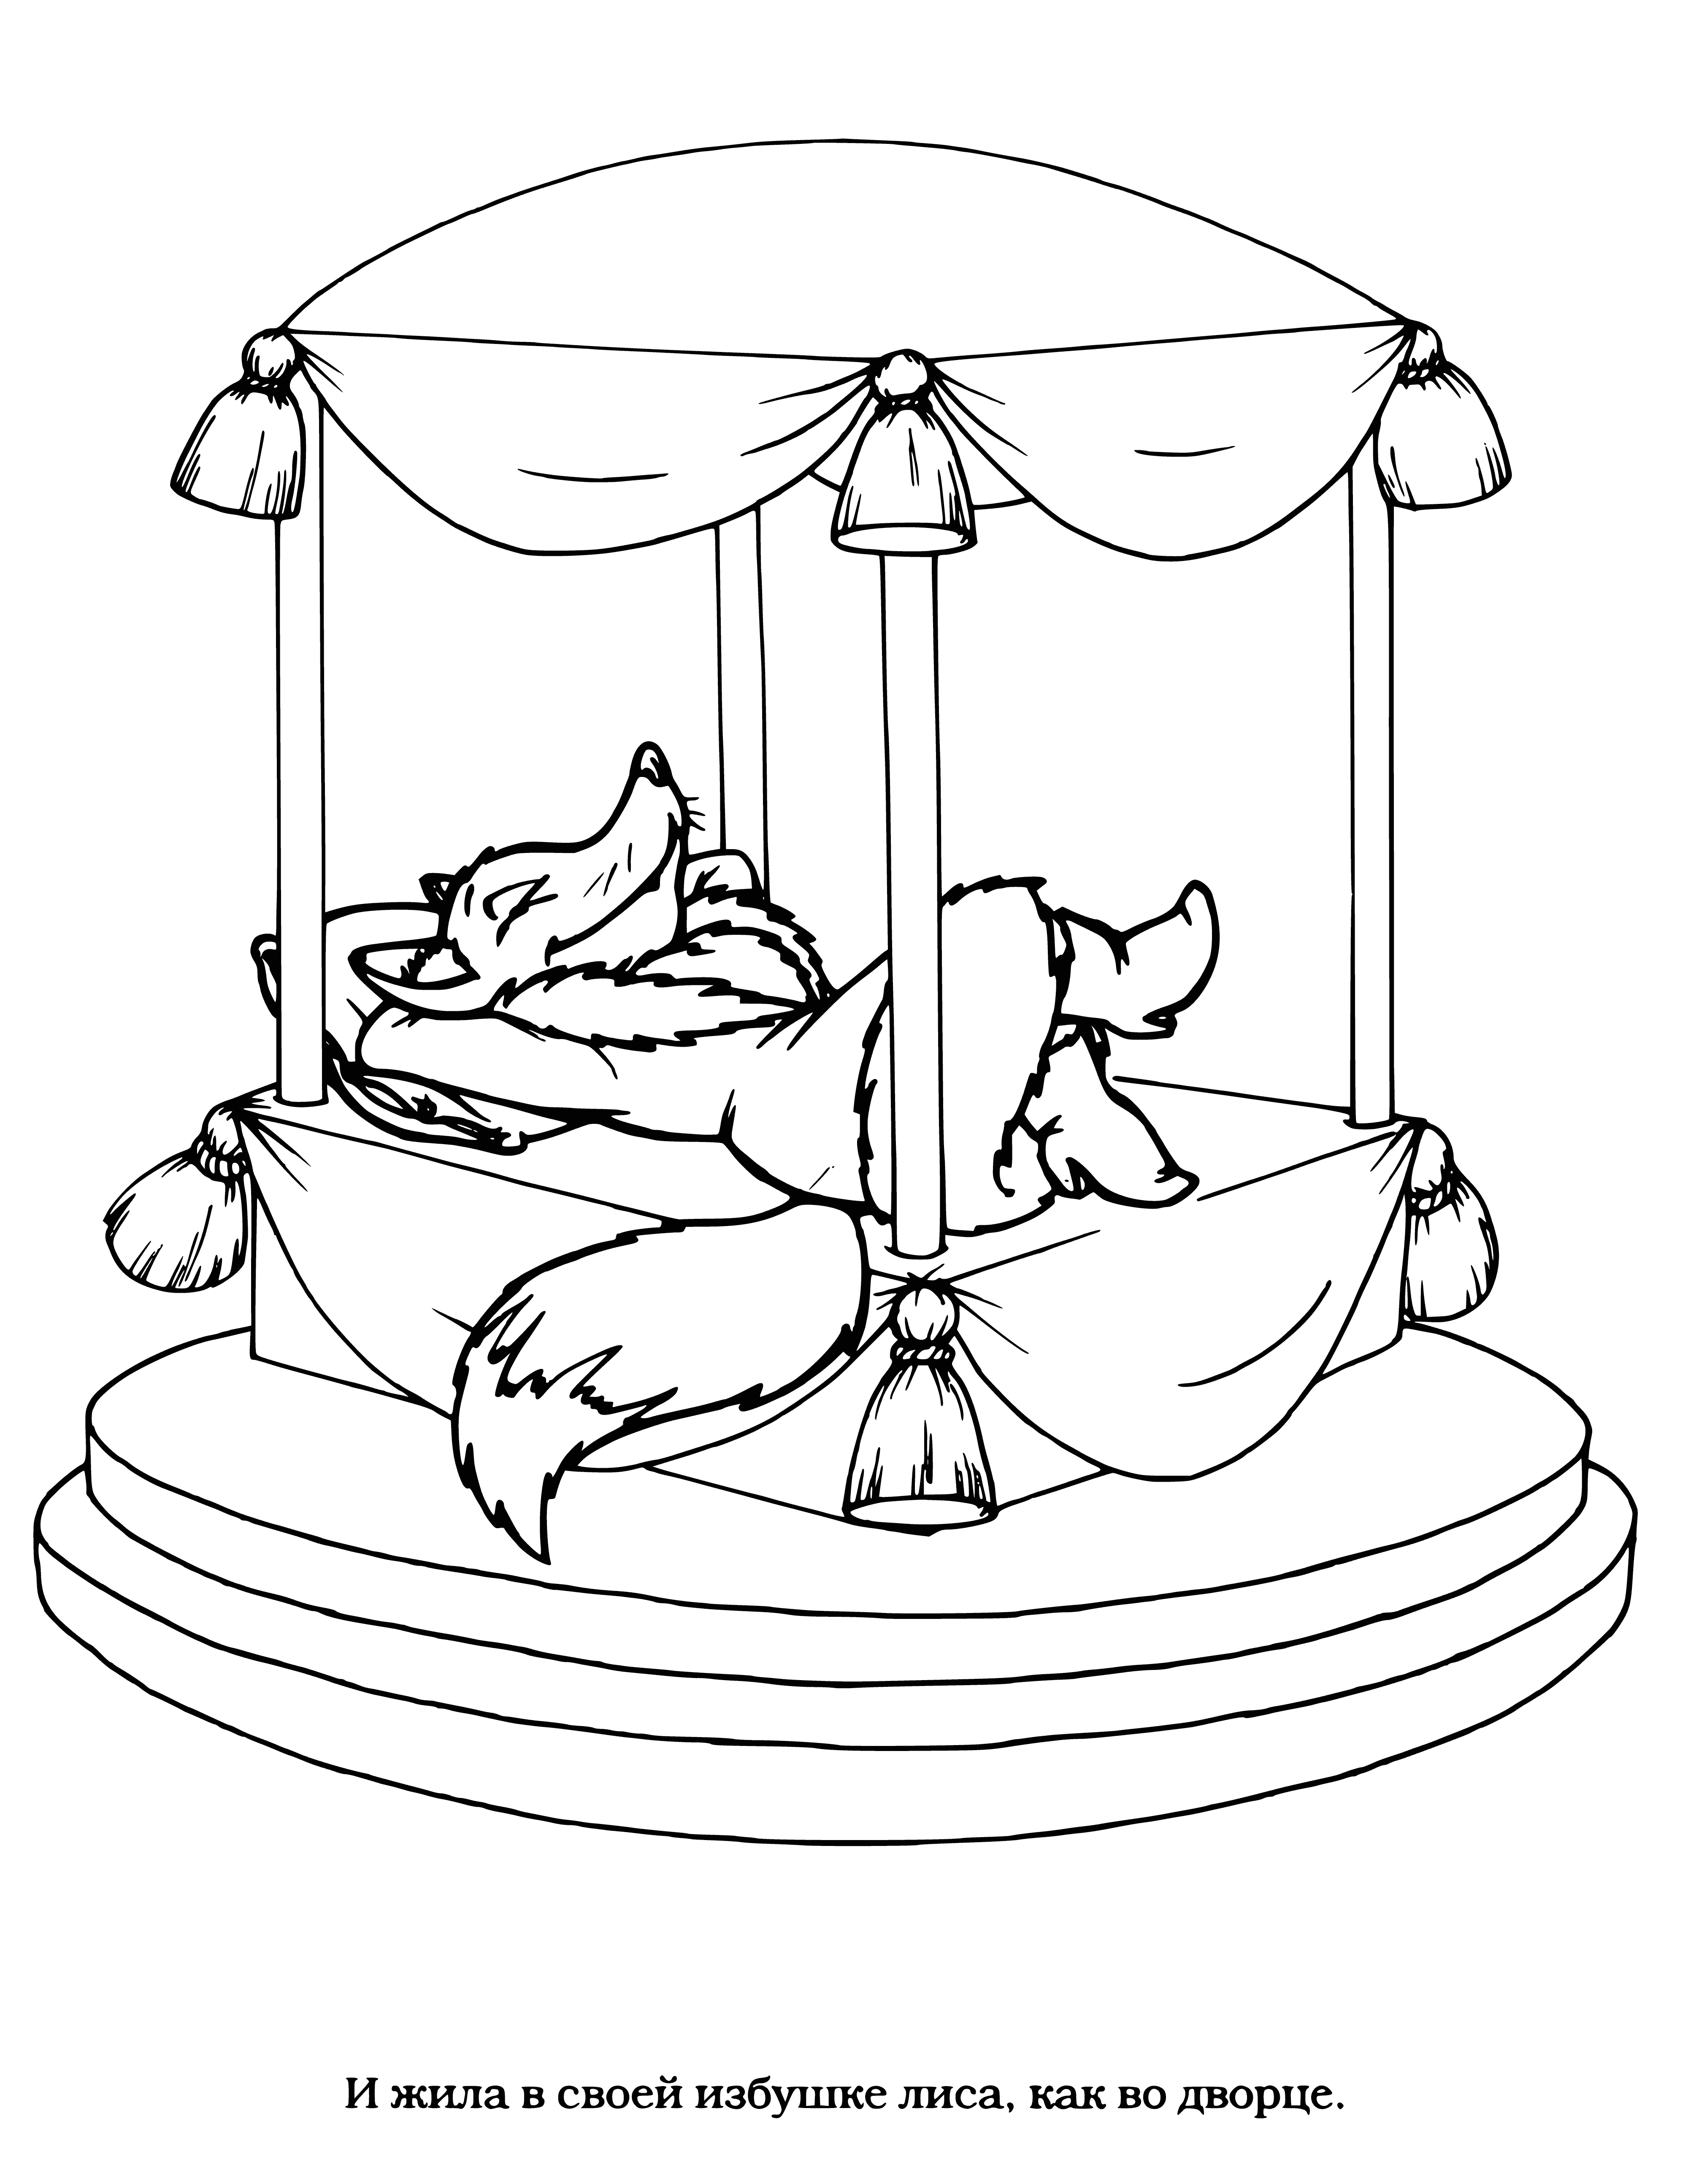 coloring page: Fox from Russian folktale known for cunning, speed, resourcefulness and trickery.